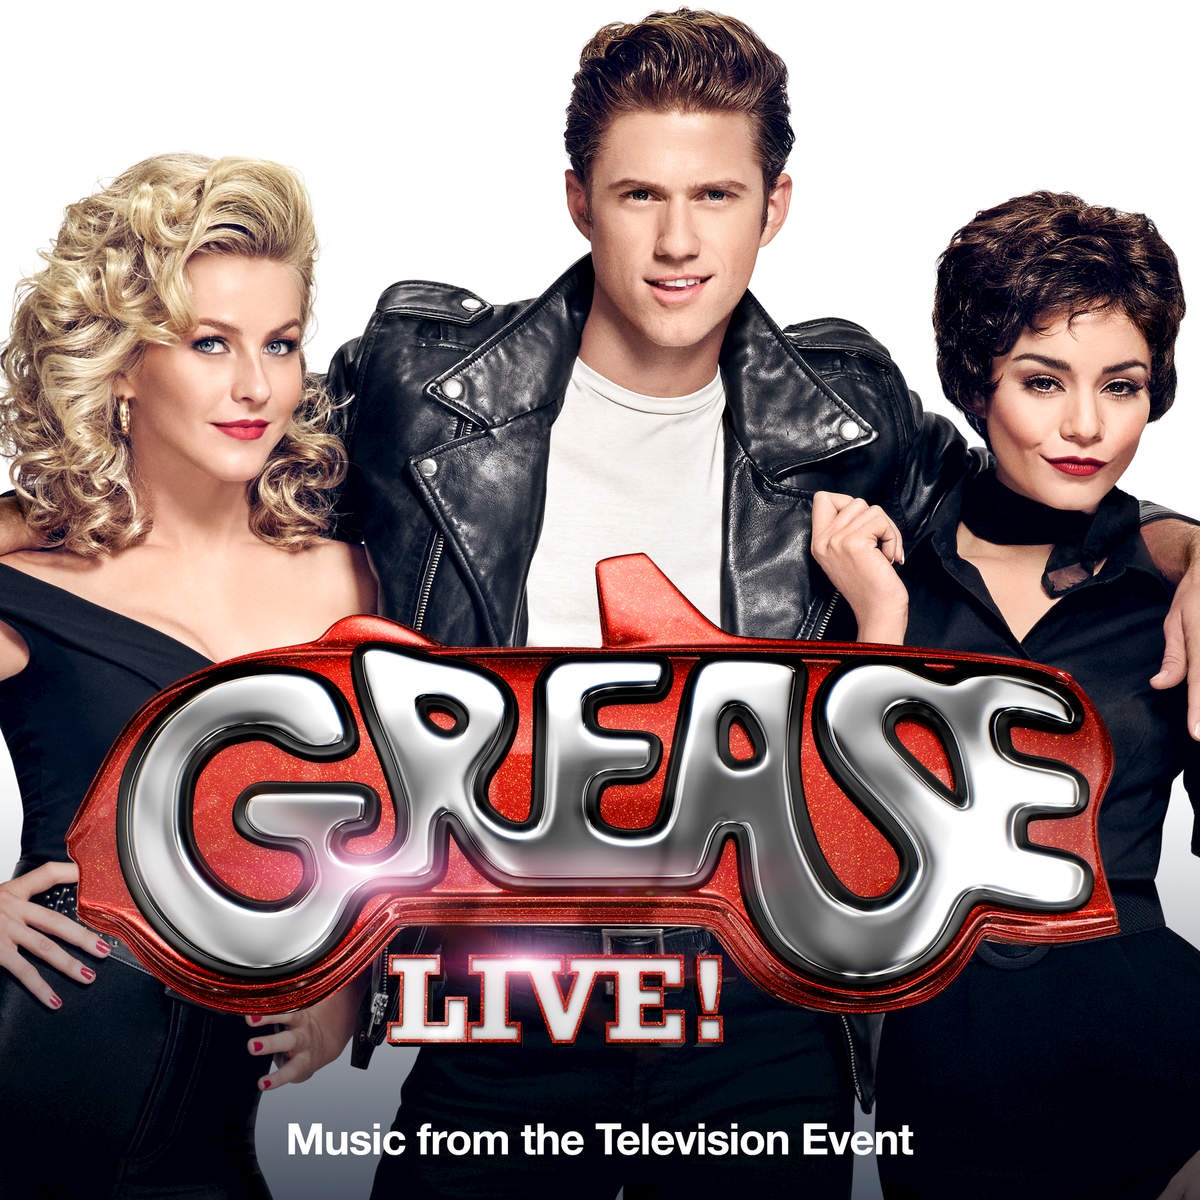 Freddy My Love - From "Grease Live!" Music From The Television Event